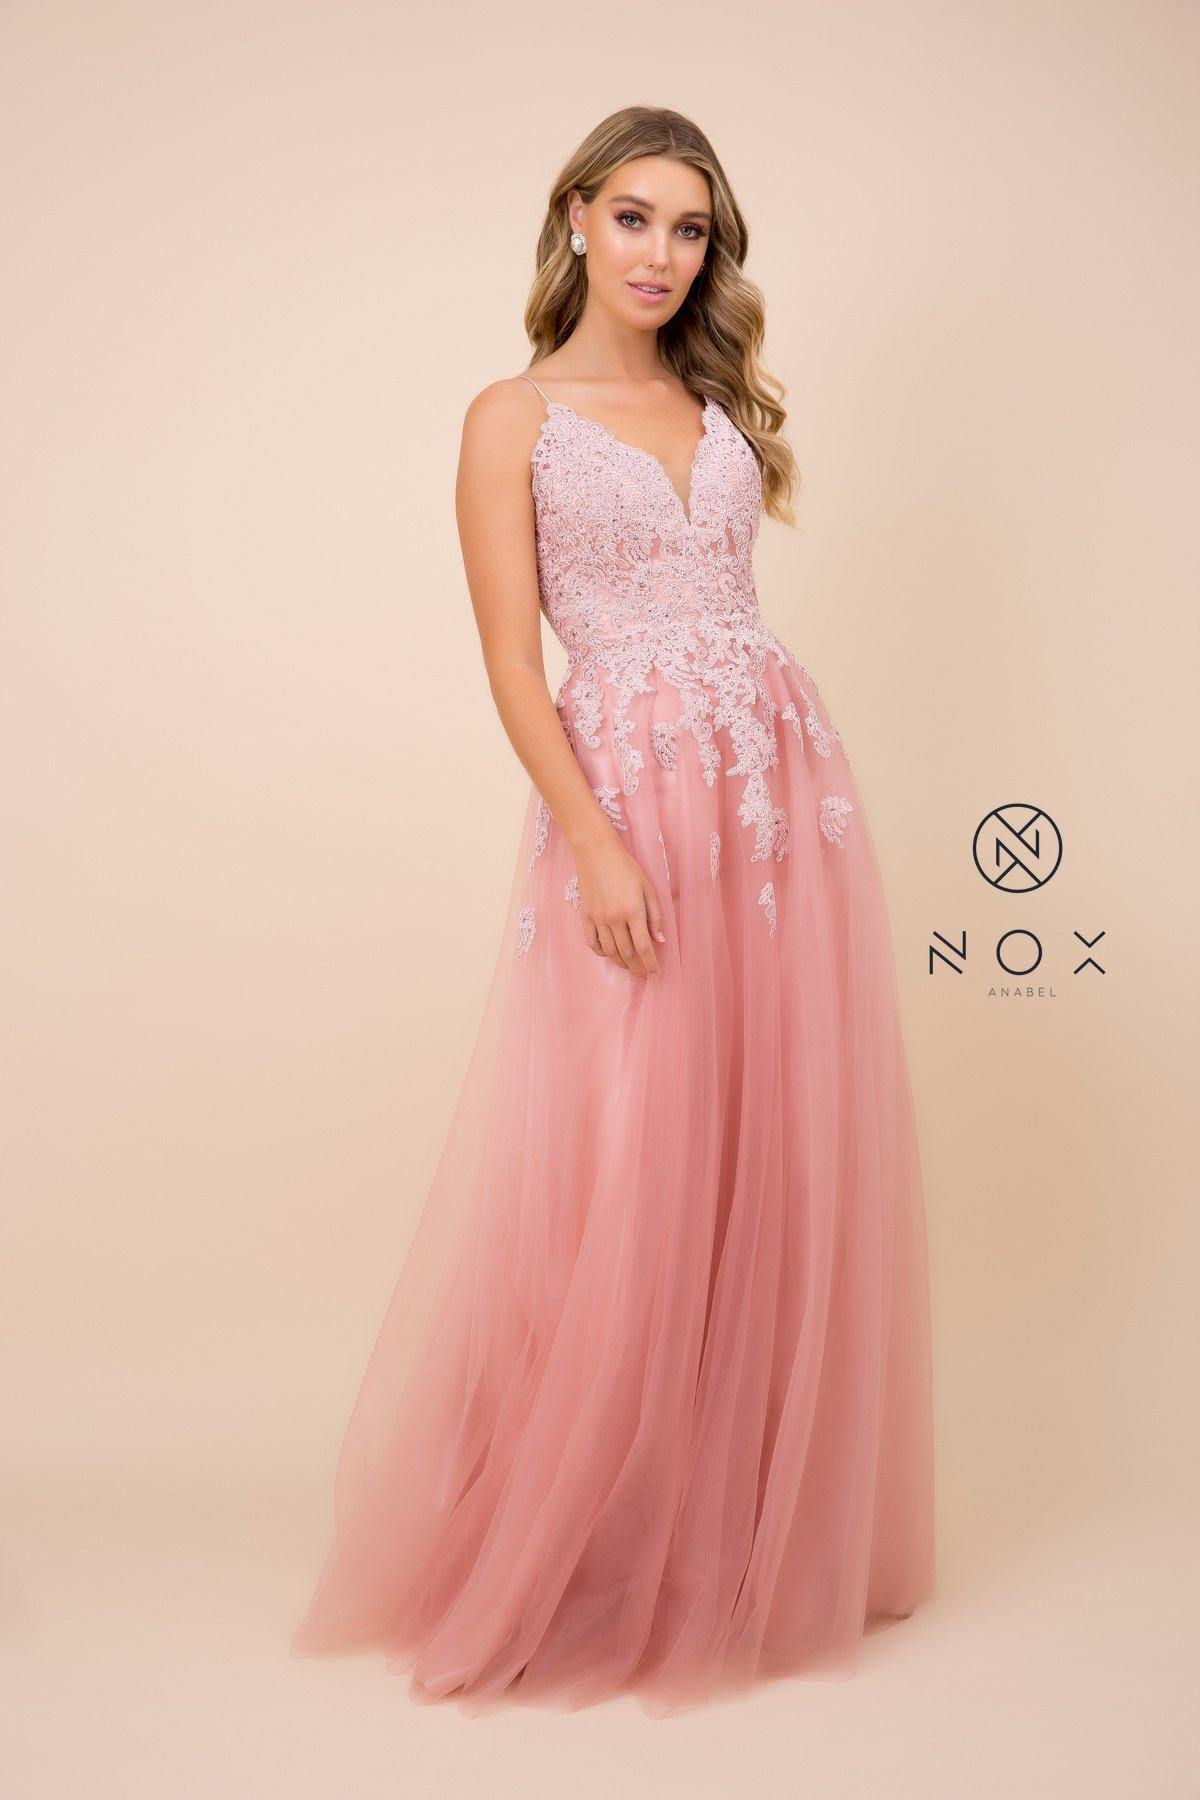 Long Evening Gown Formal Prom Dress - The Dress Outlet Nox Anabel